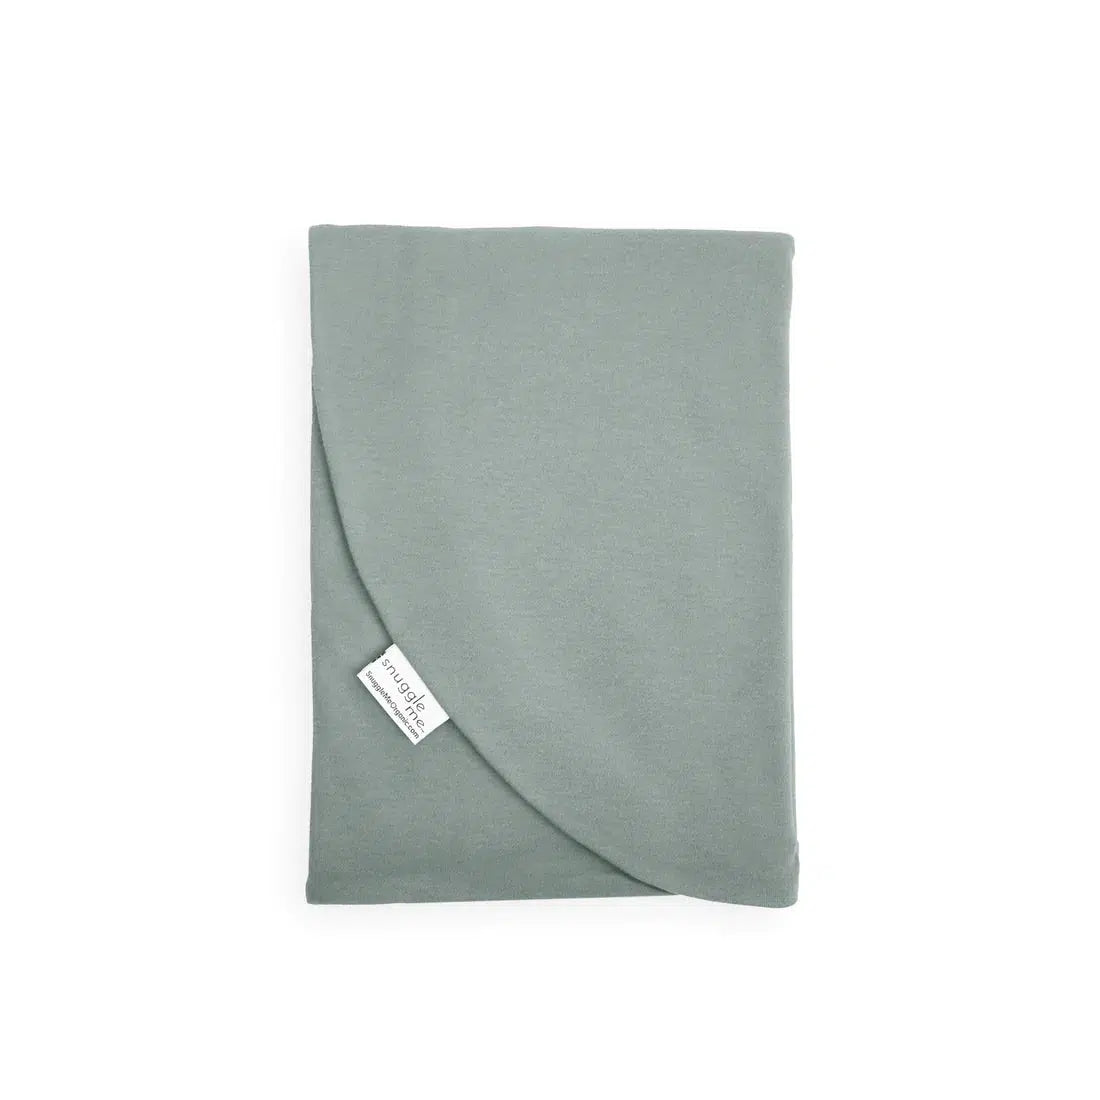 A Snuggle Me Lounger Cover | Slate with a tag on it.